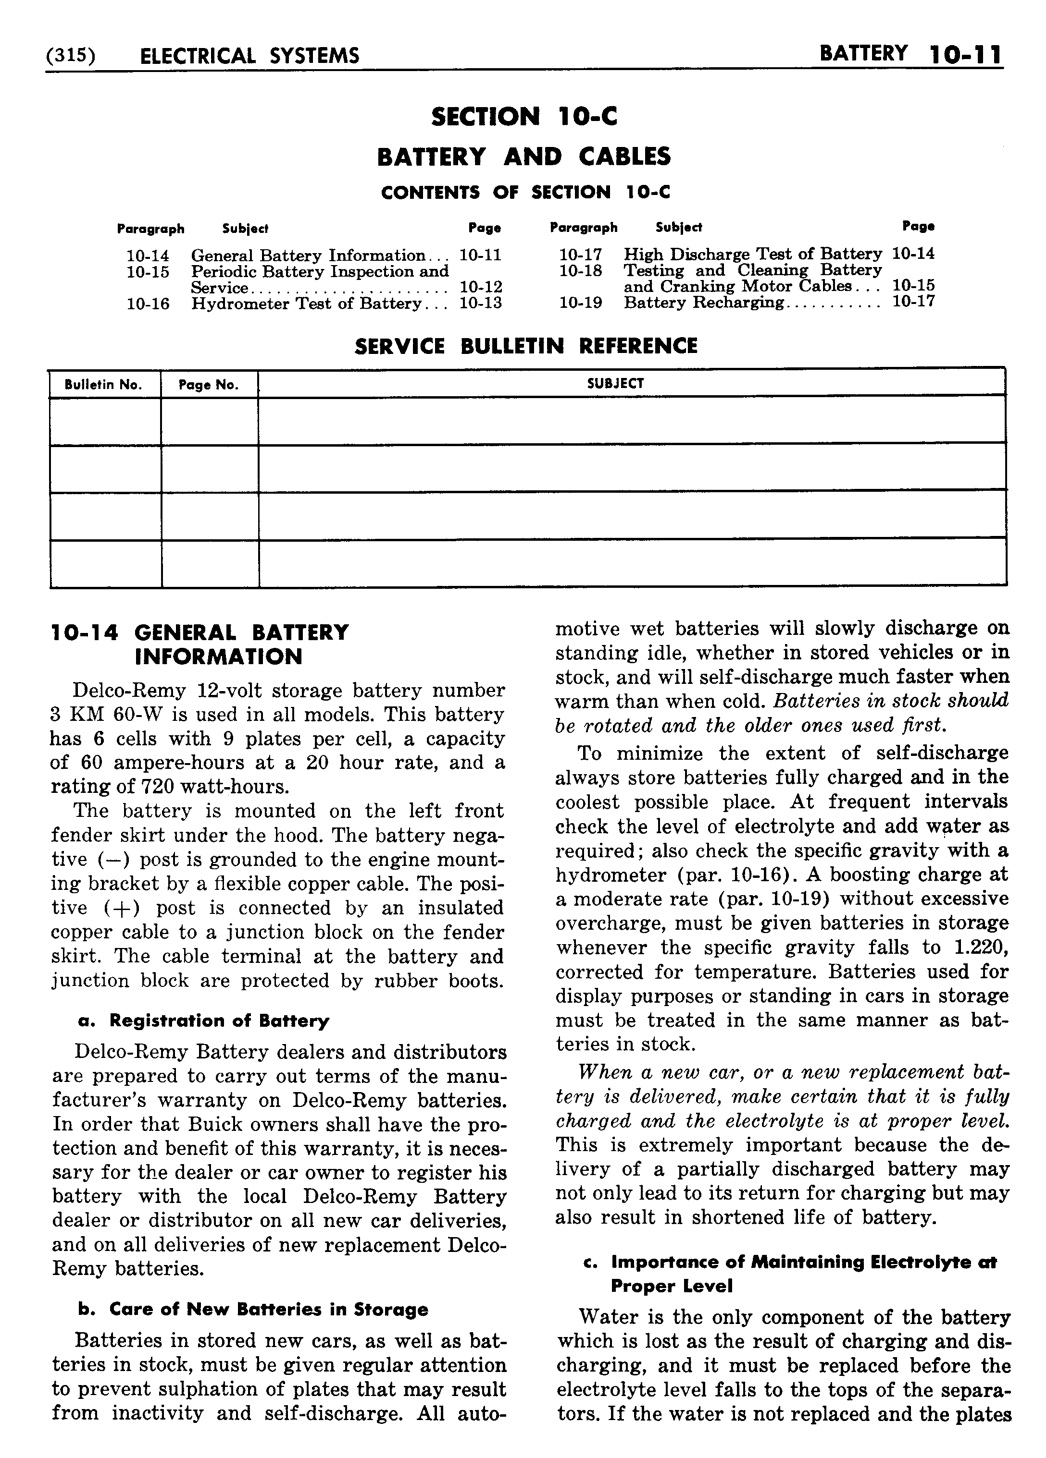 n_11 1955 Buick Shop Manual - Electrical Systems-011-011.jpg